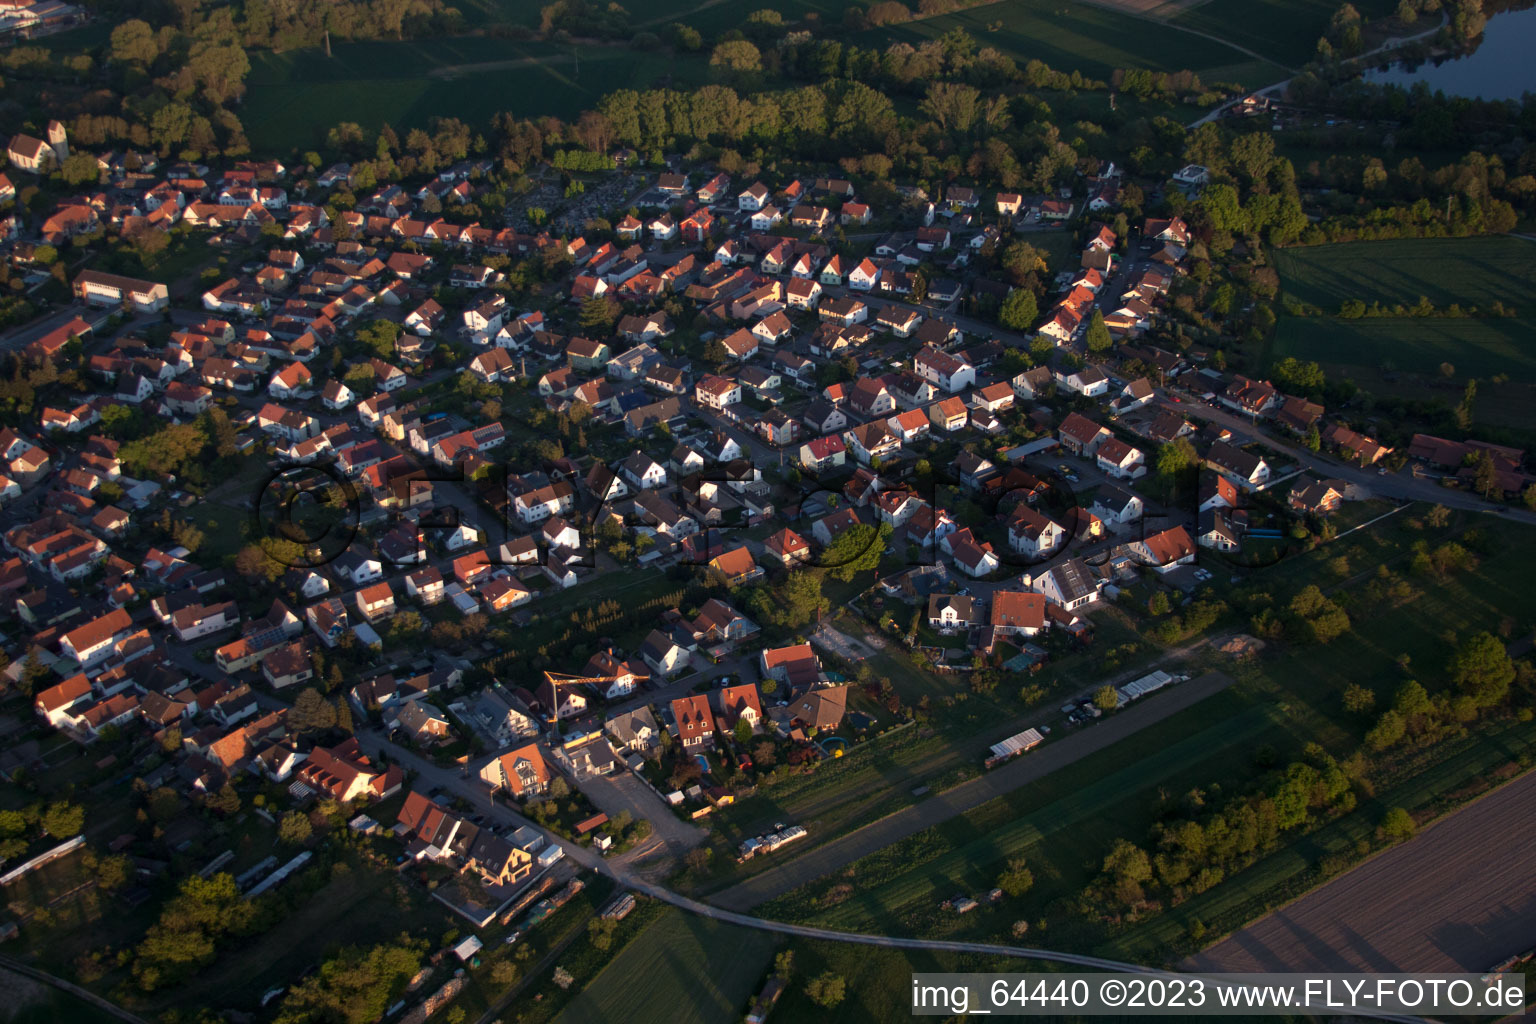 Aerial view of Berg in the state Rhineland-Palatinate, Germany